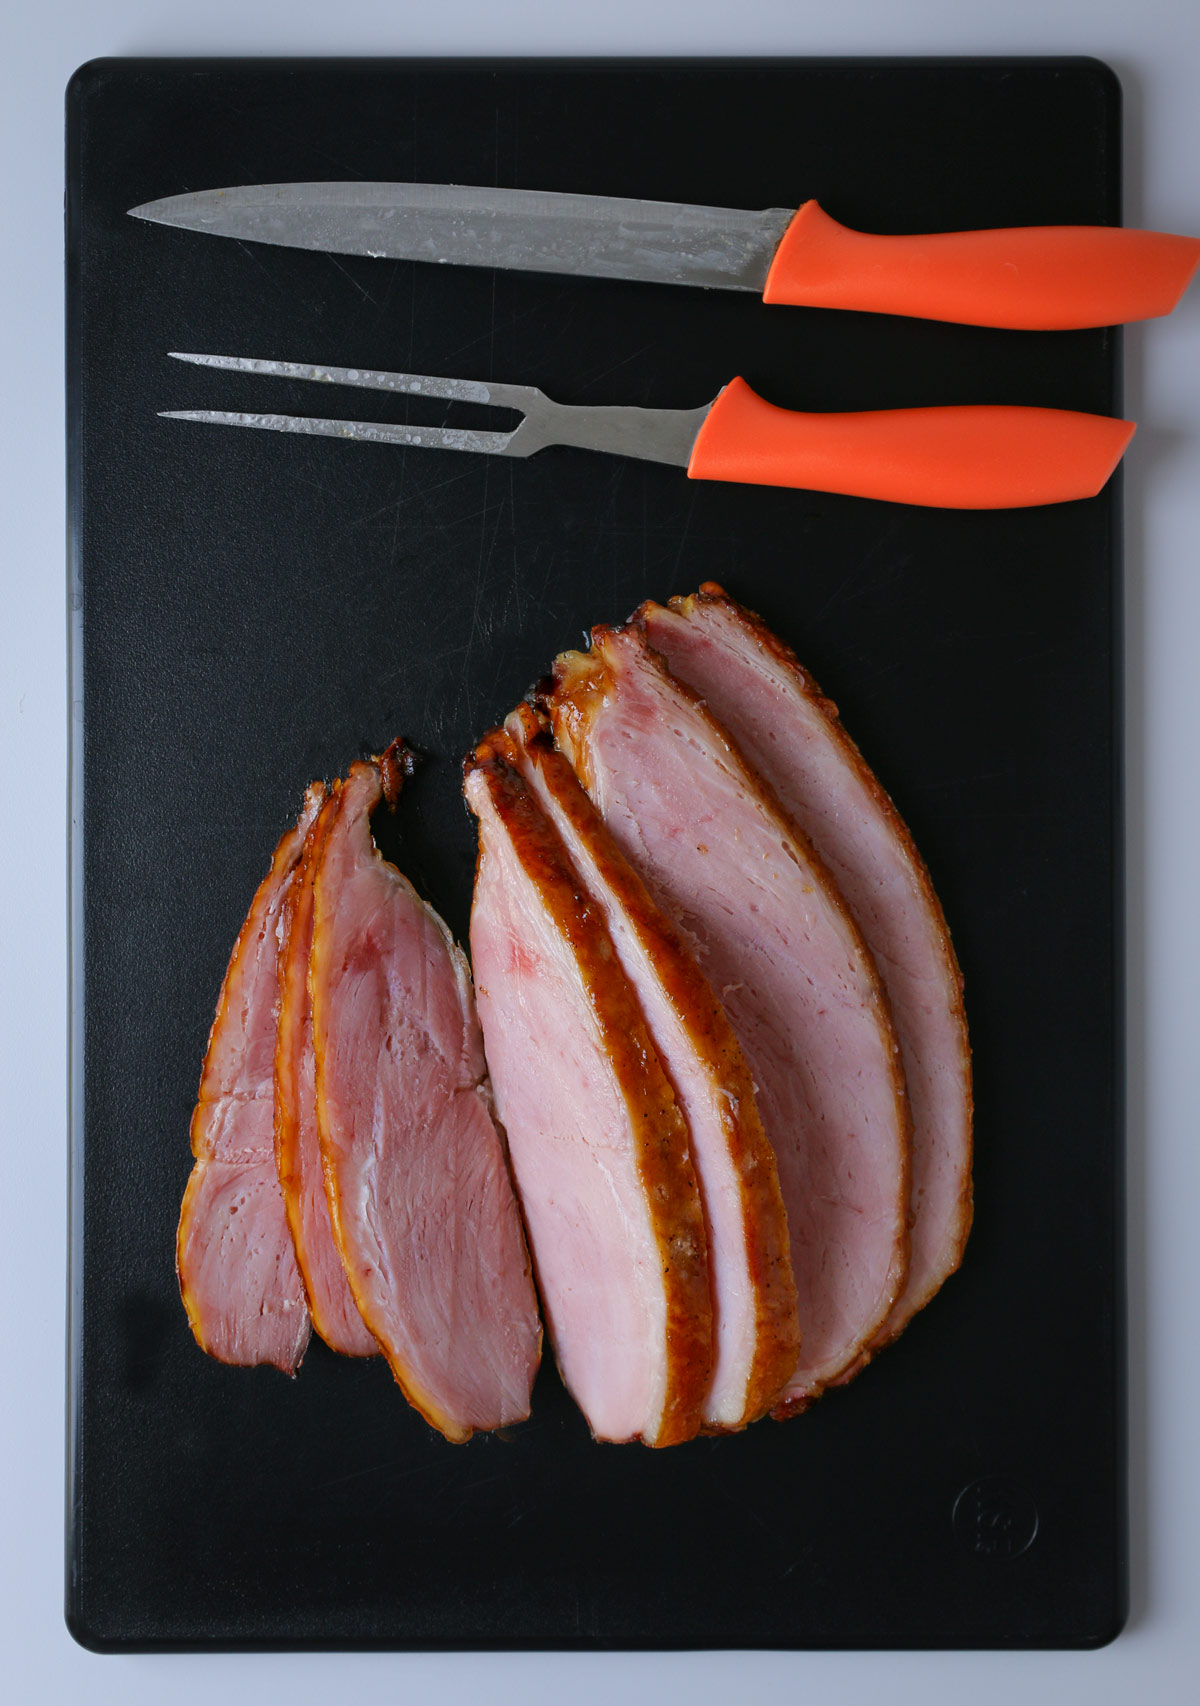 slicing ham on black cutting board with orange knife and carving fok.